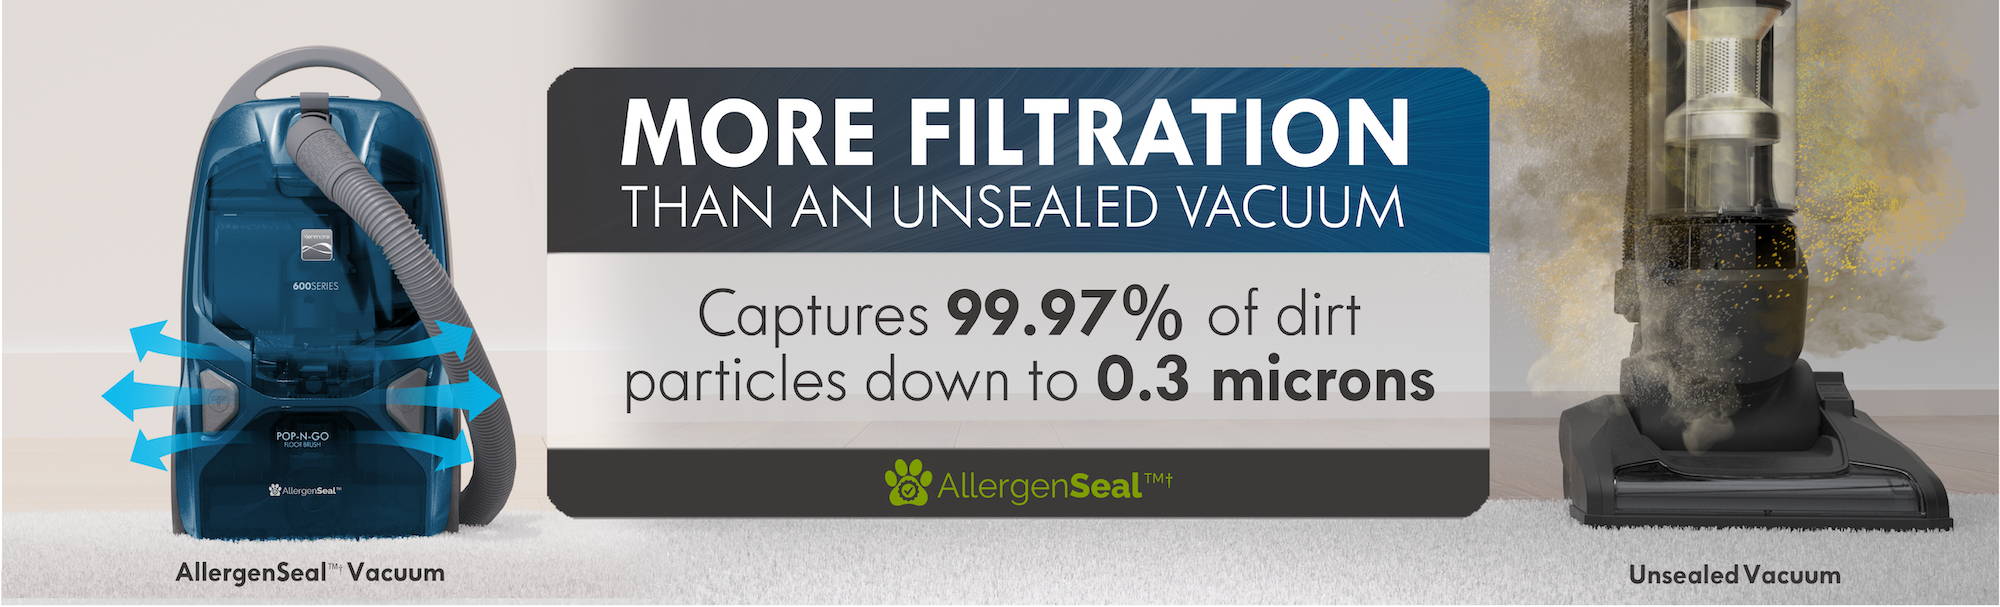 AllergenSeal™ more filtration than an unsealed vacuum